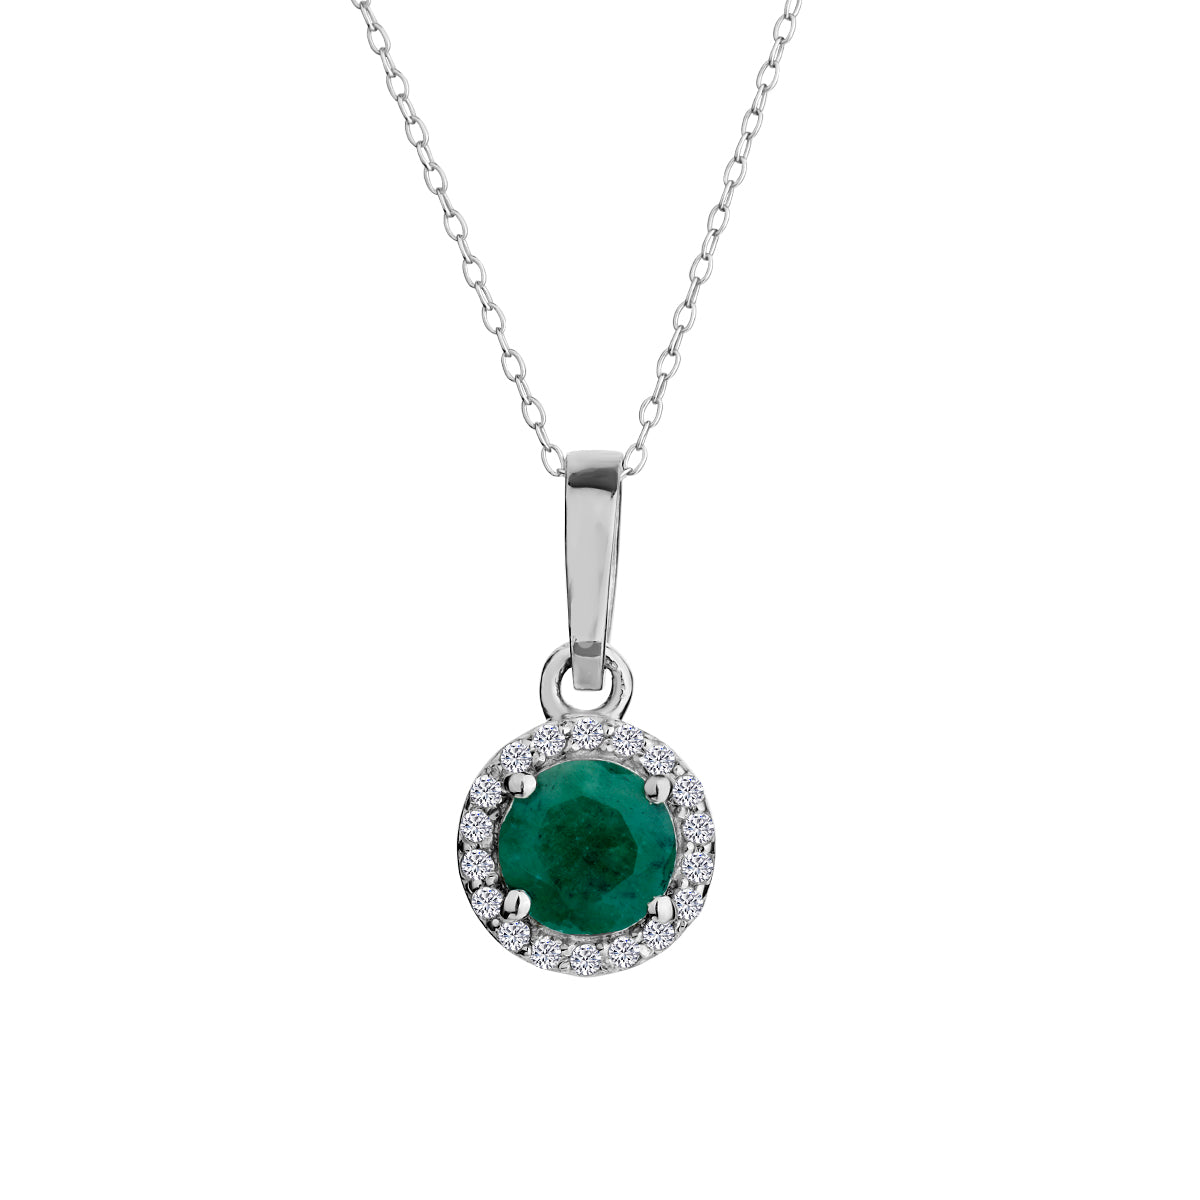 Genuine Emerald & White Zirconia Pendant,  Sterling Silver. Necklaces and Pendants. Griffin Jewellery Designs. 